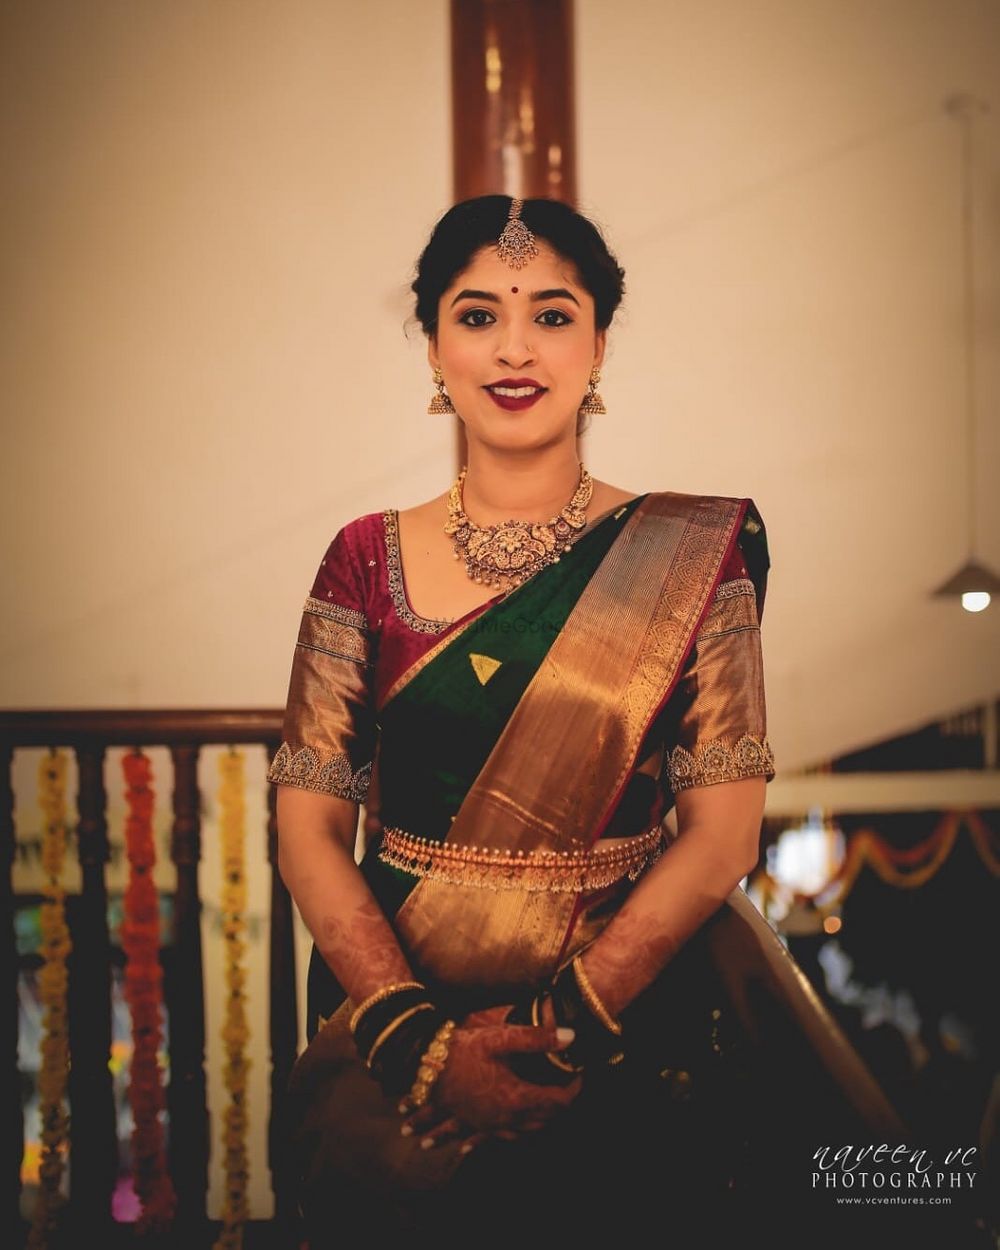 Photo From South Indian fashion - By Saldanha